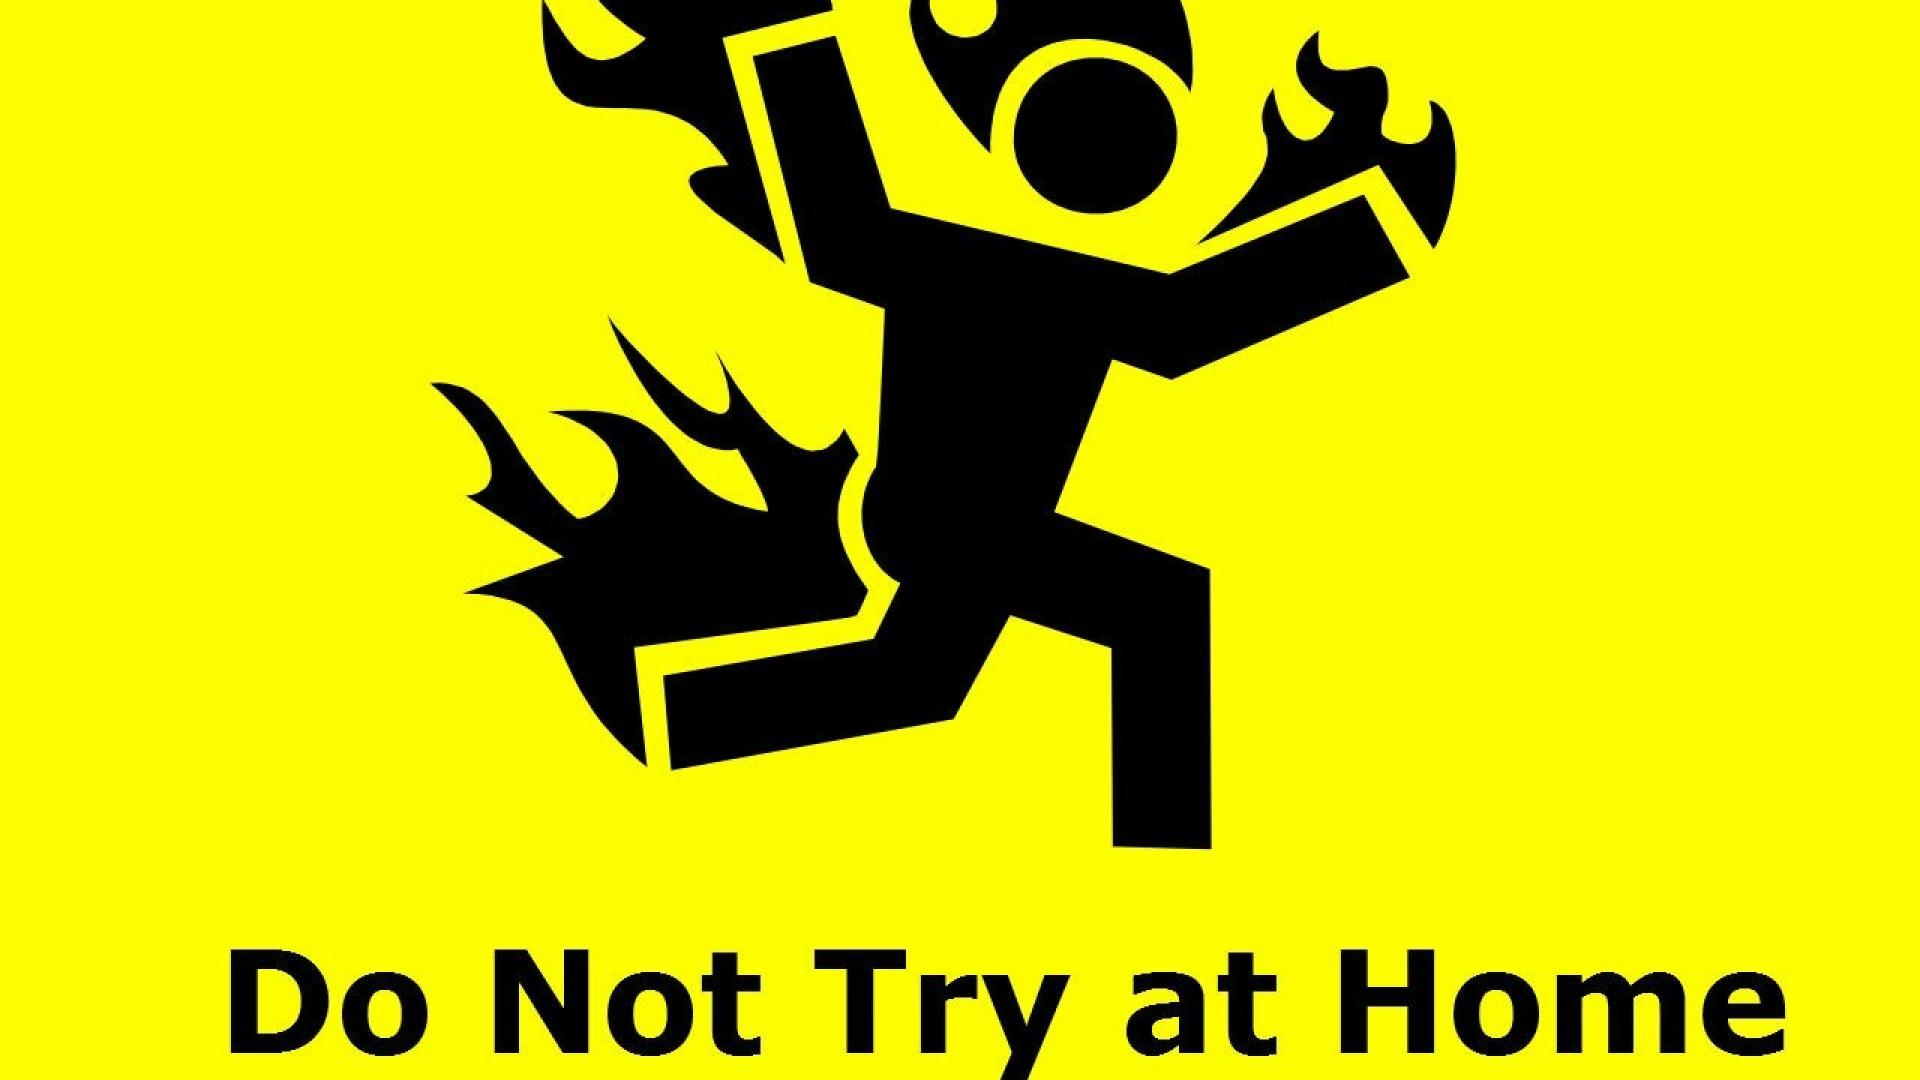 Funny Warning Signs Wallpaper images